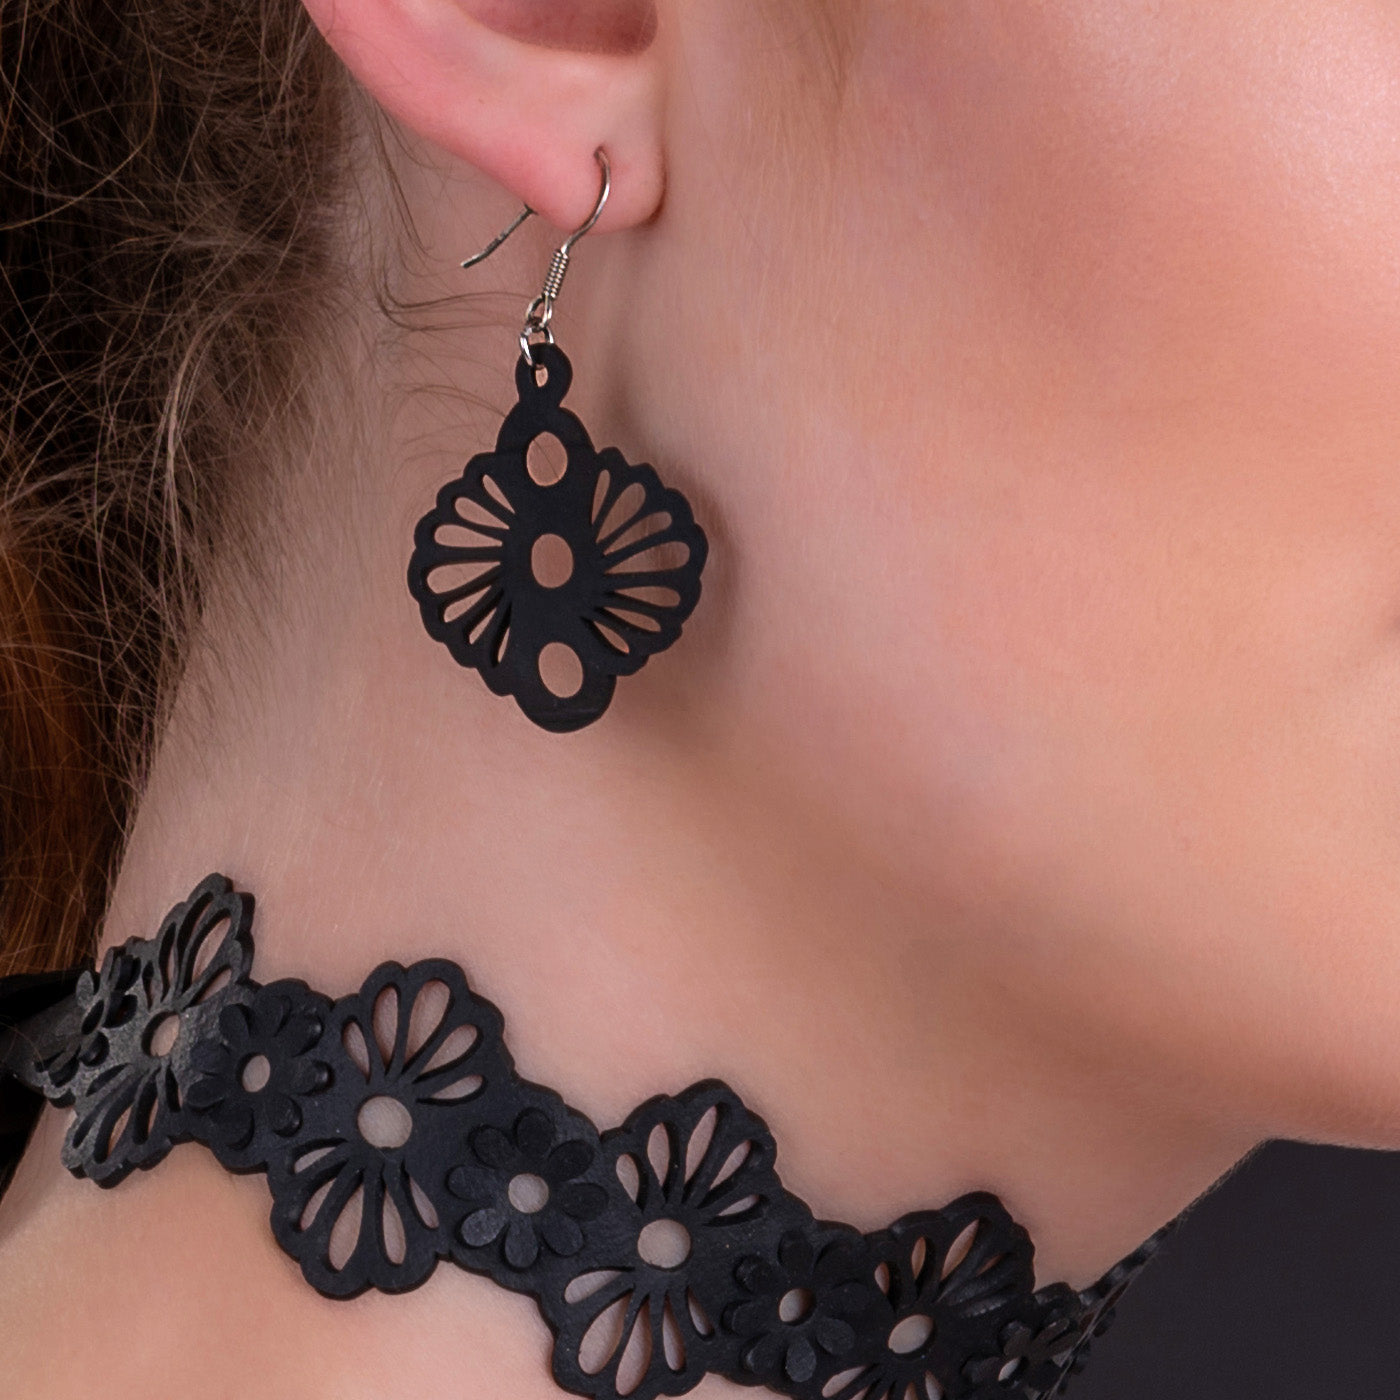 Blossom 3D Flower Recycle Rubber Earrings by Paguro Upcycle